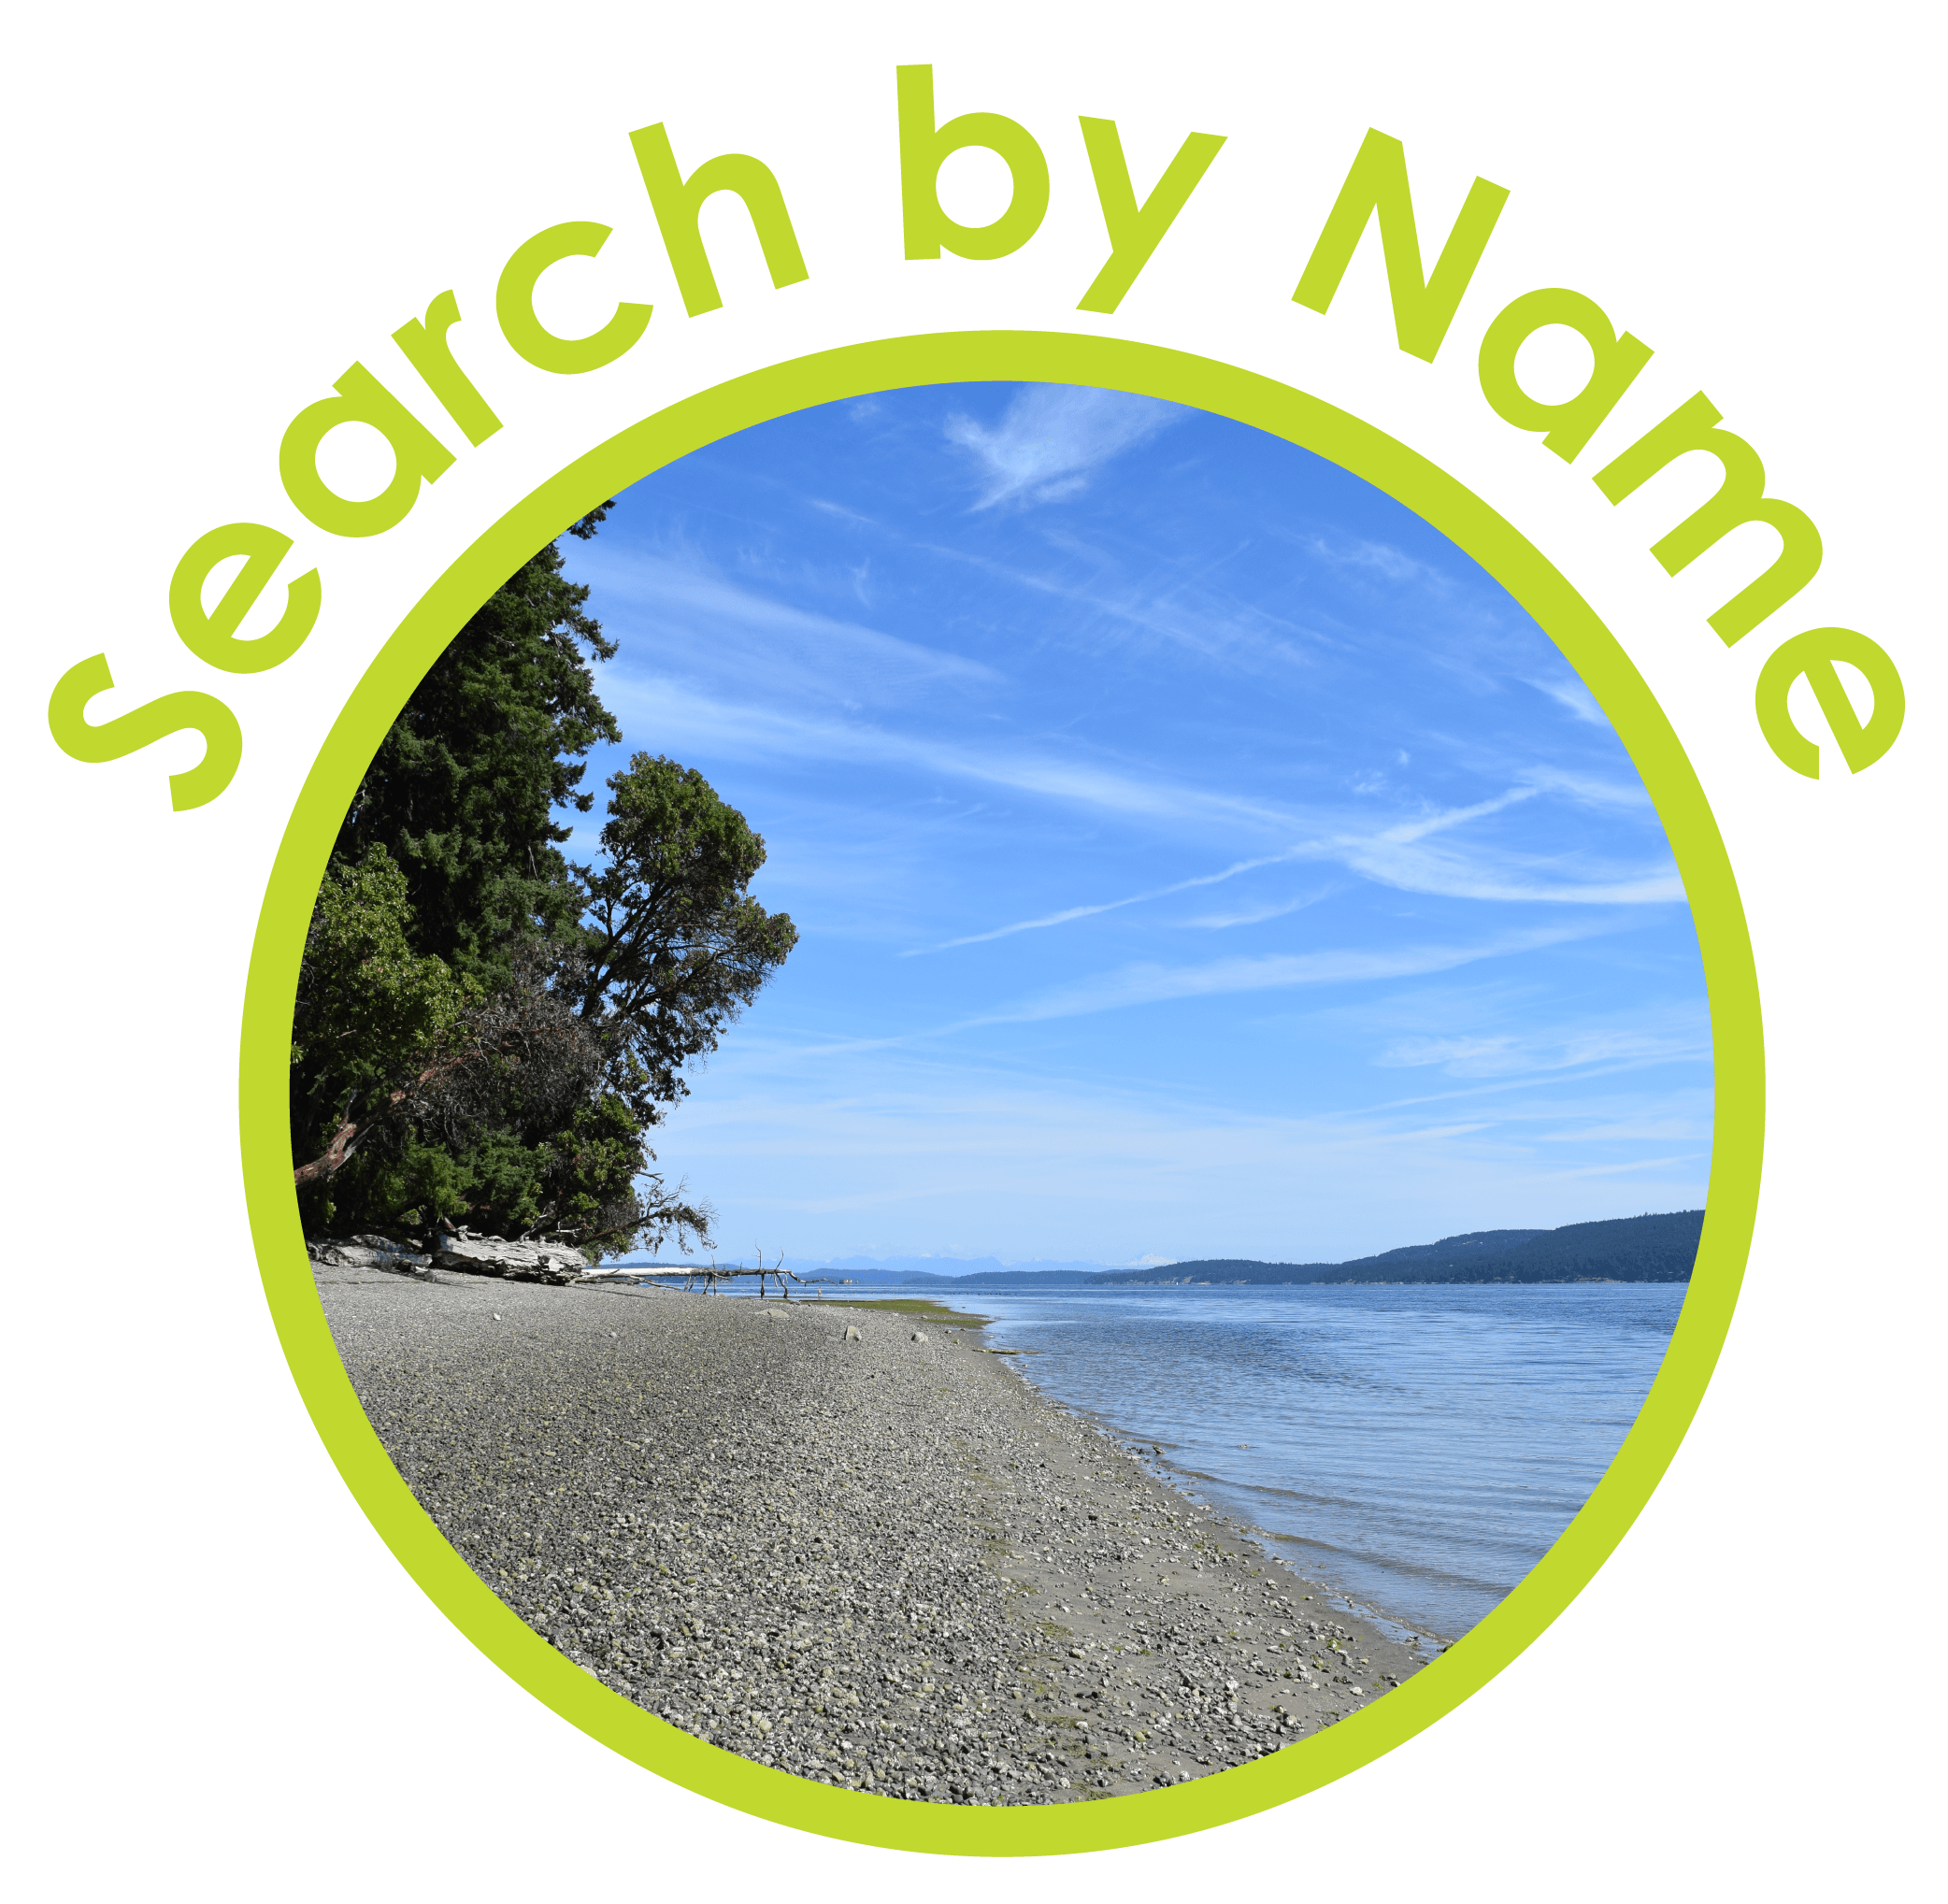 Website Buttons - Search by Name